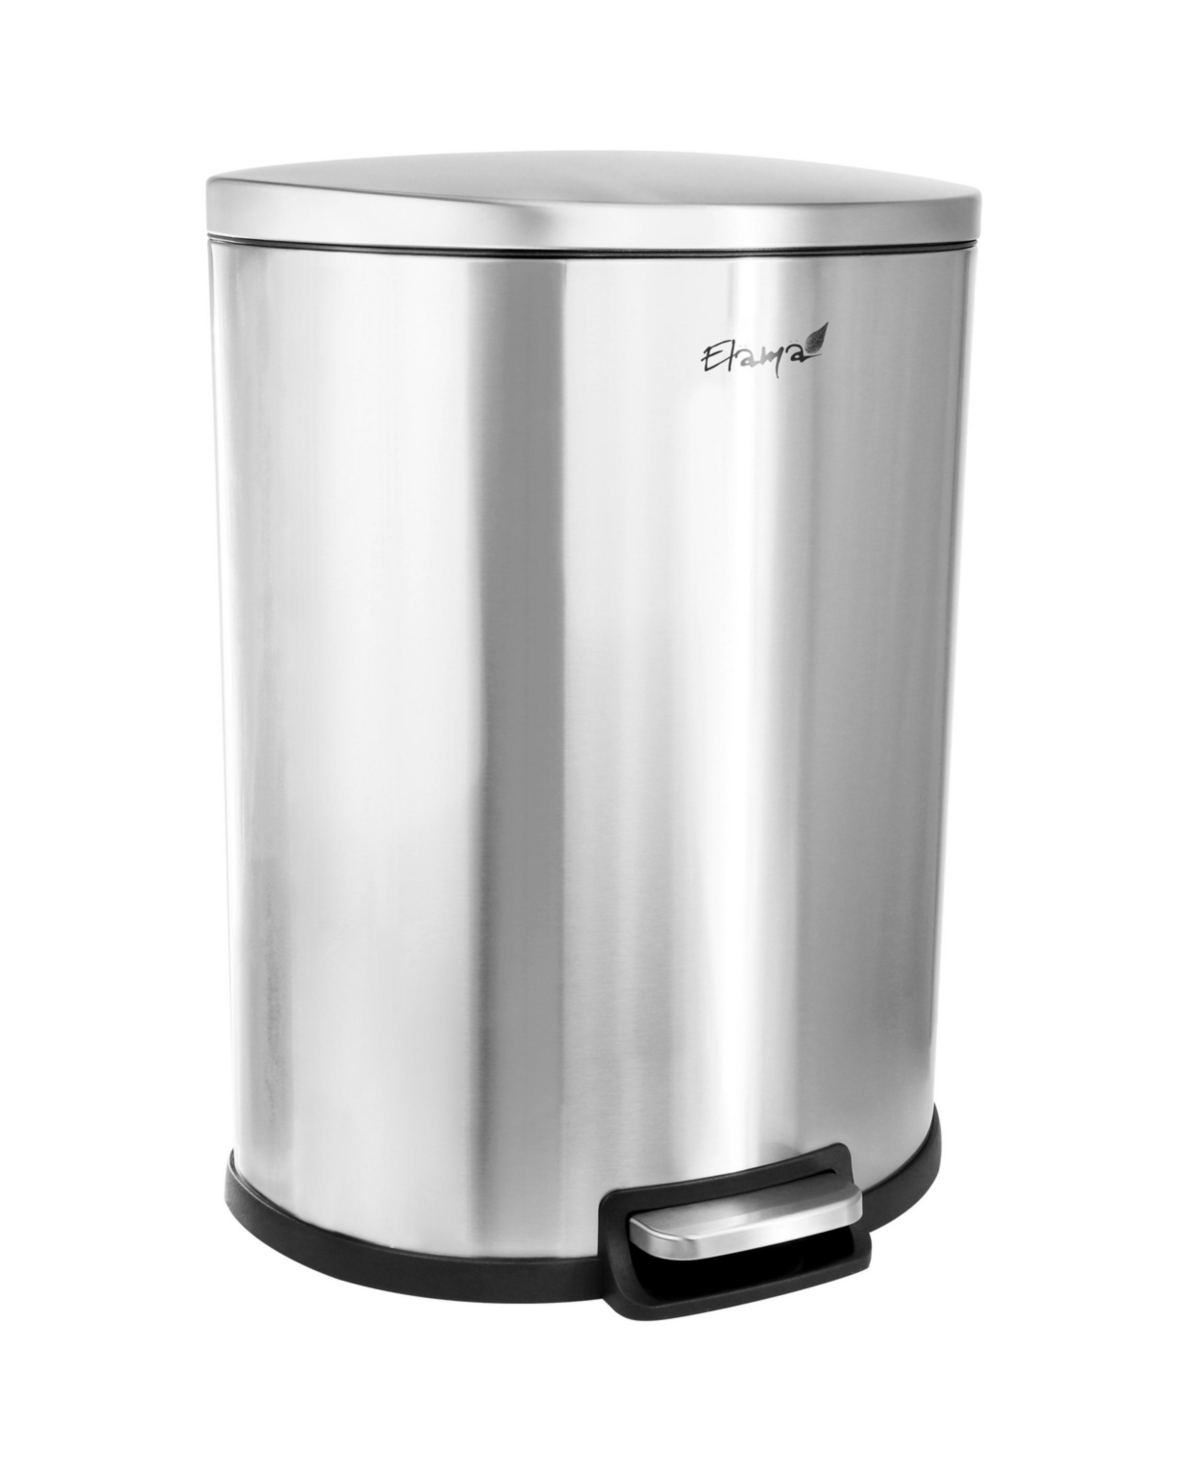 50Litter 13 Gallon Half Circle Stainless Steel Step Trash Bin with Slow Close Mechanism in Matte Silver - Silver